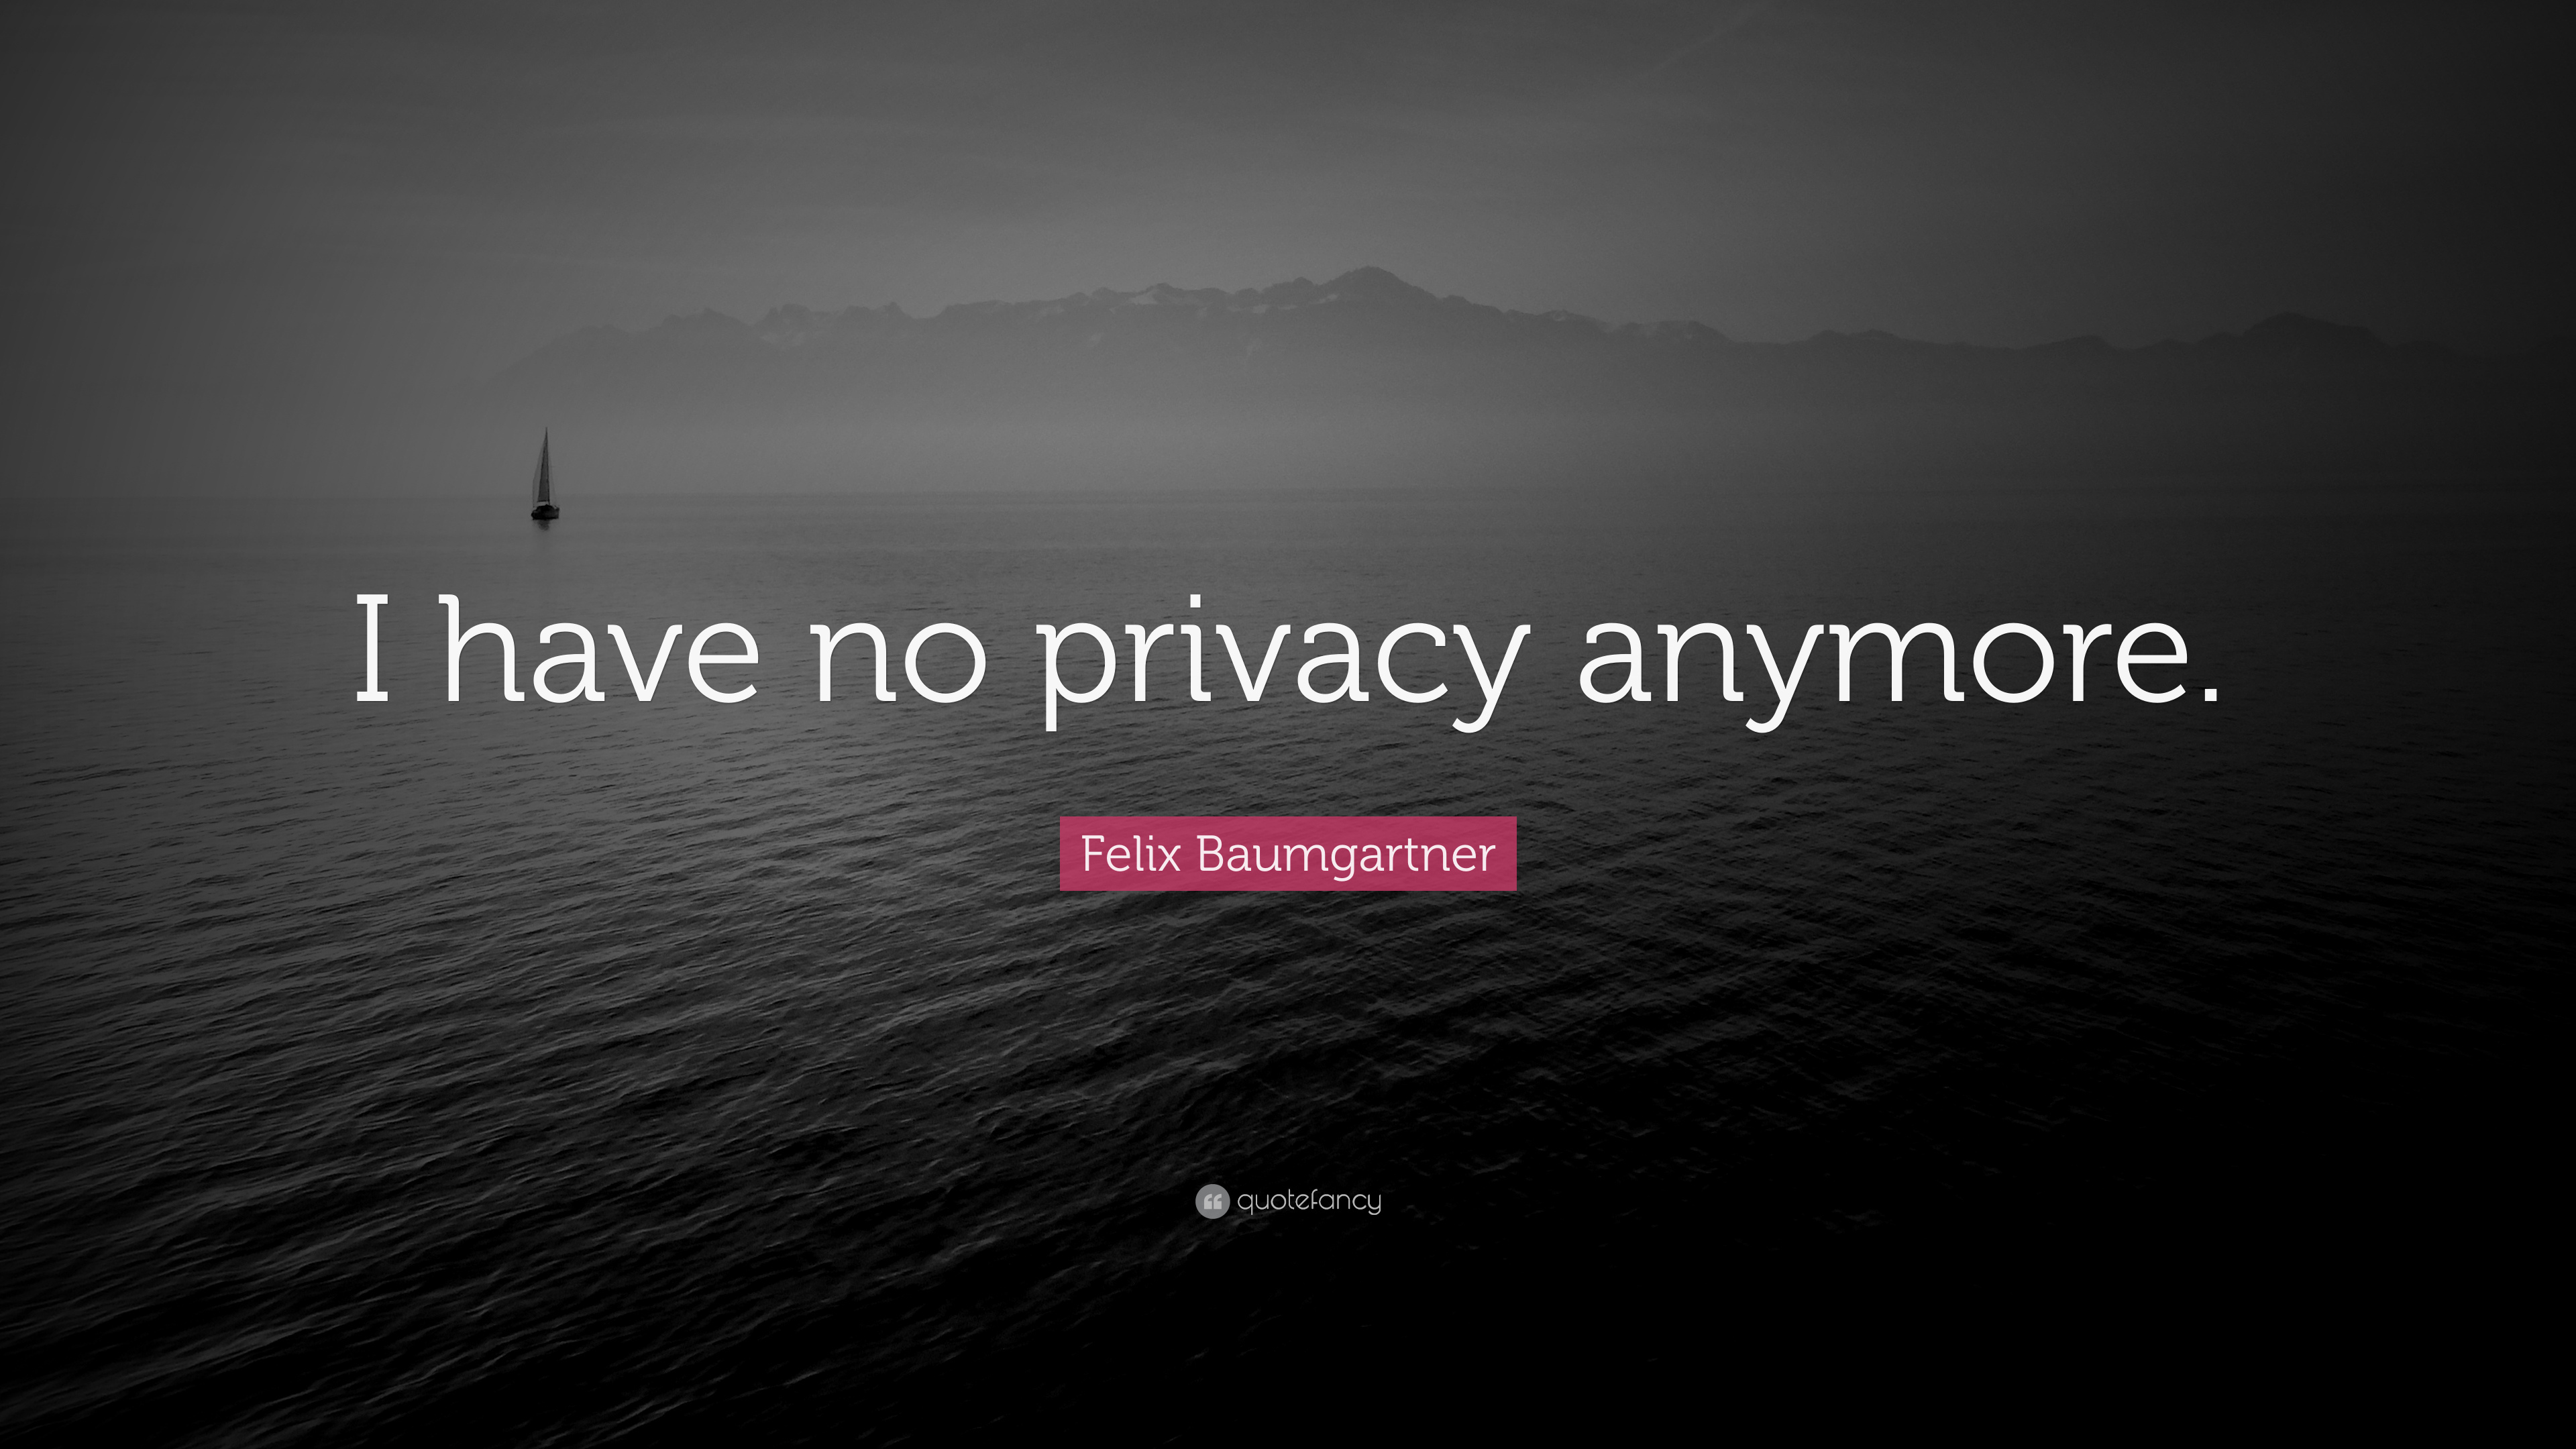 Felix Baumgartner Quote: “I have no privacy anymore.” 7 wallpaper